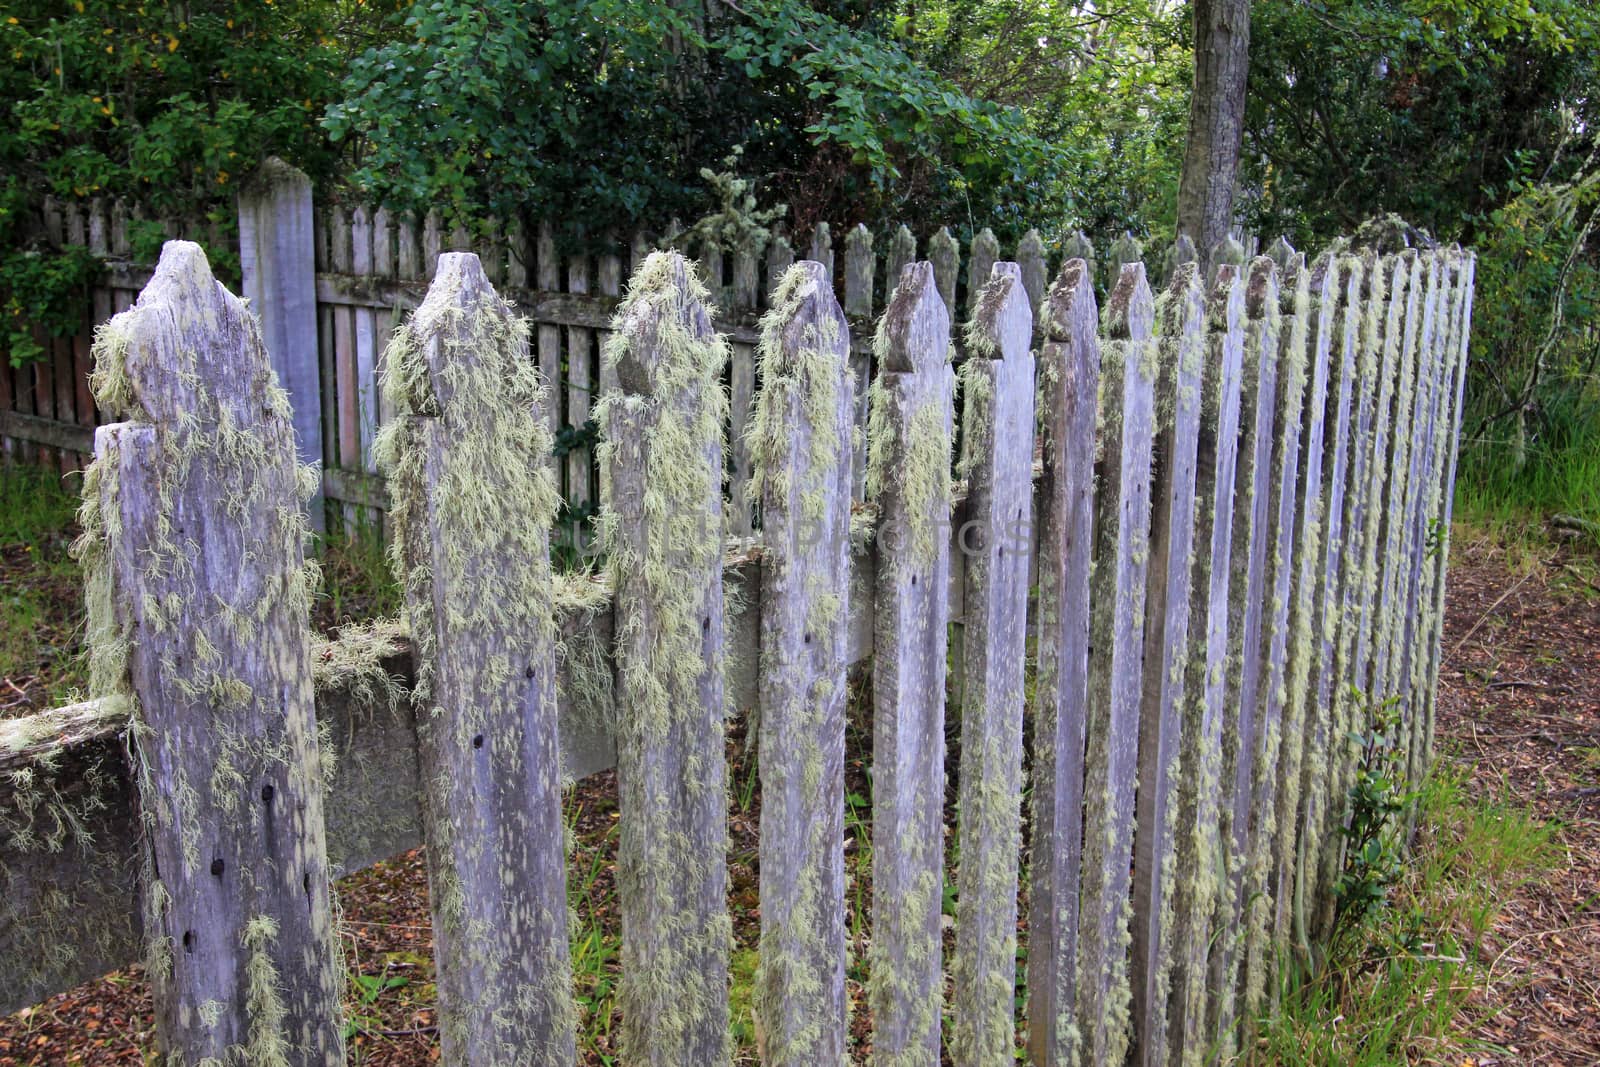 Overgrown wooden garden fence detail, at a farm, Patagonia, Argentina by cicloco